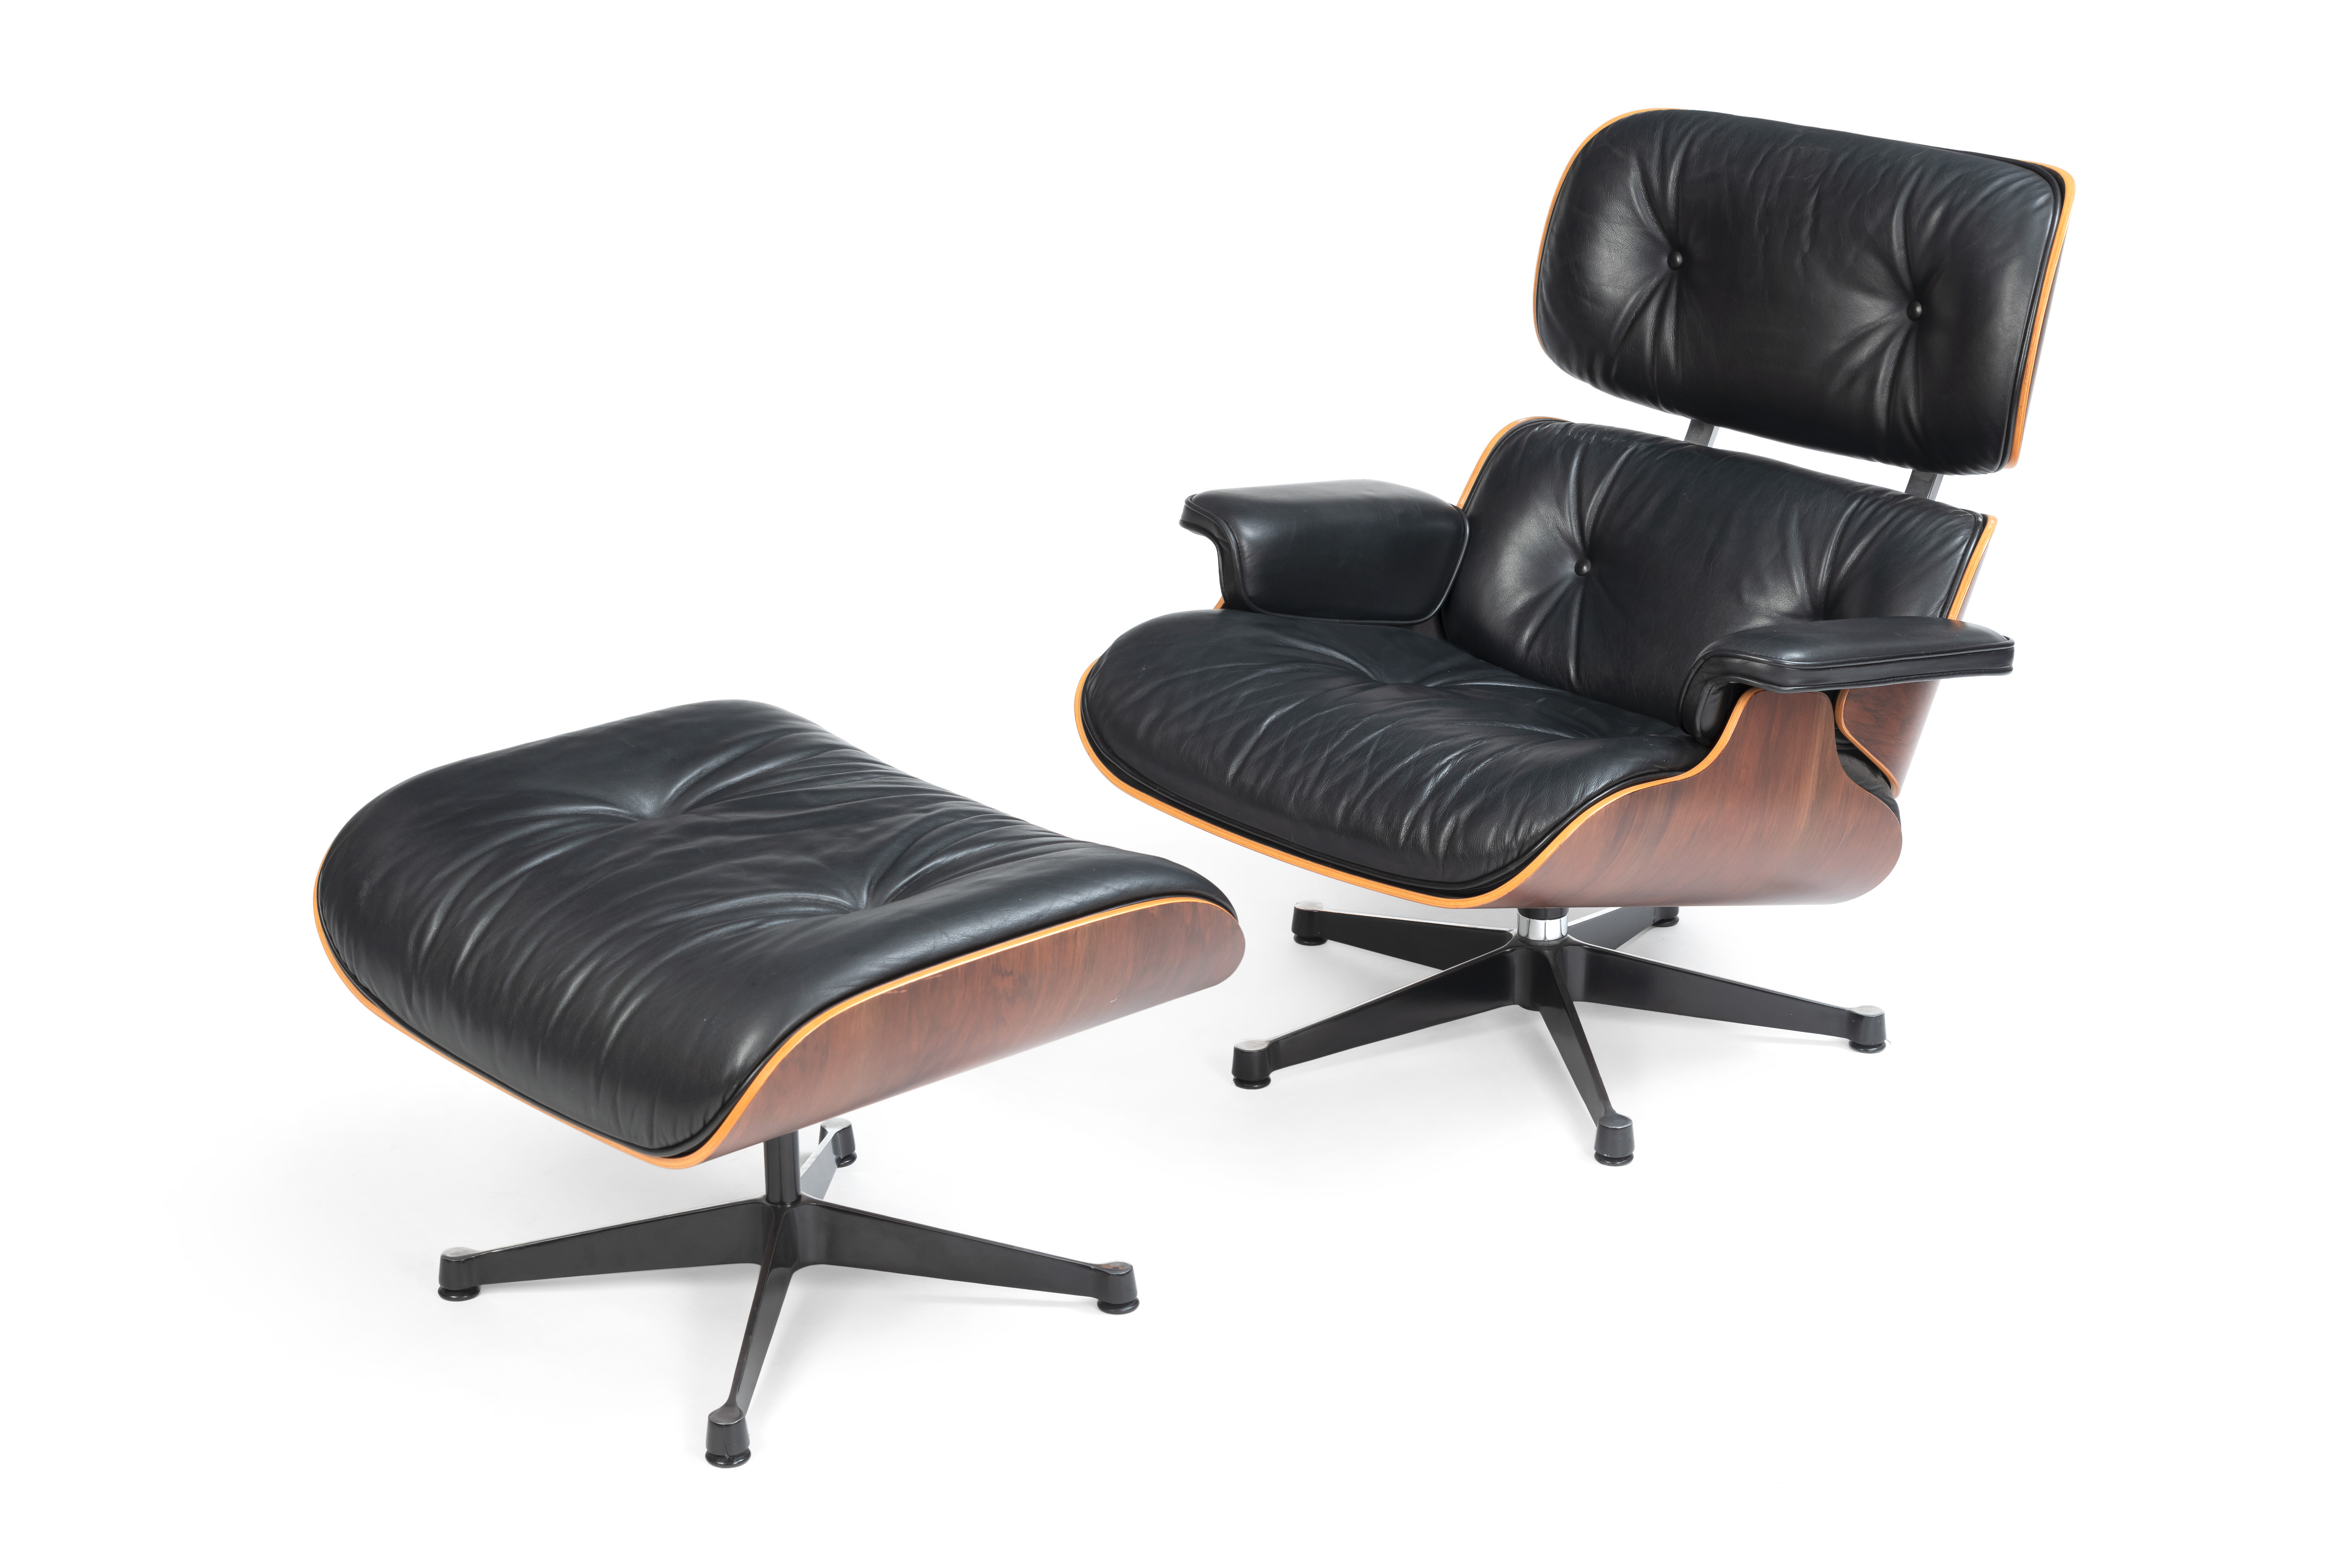 Eames, Charles und Ray